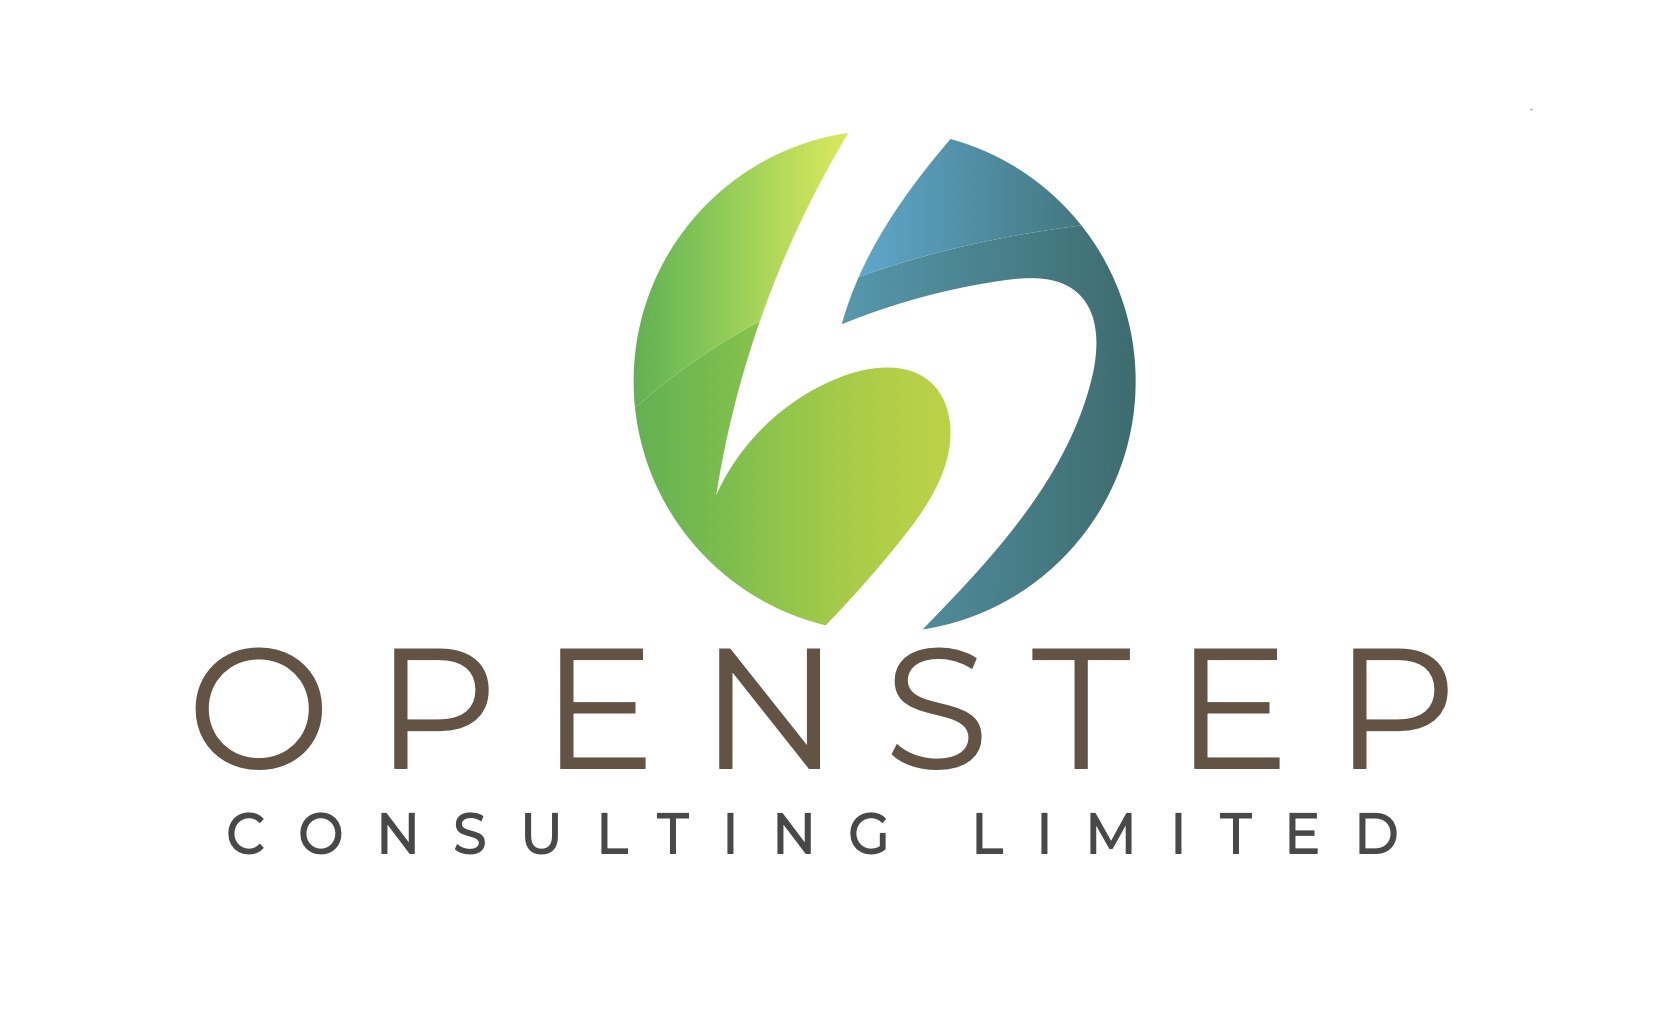 Openstep Consulting Limited